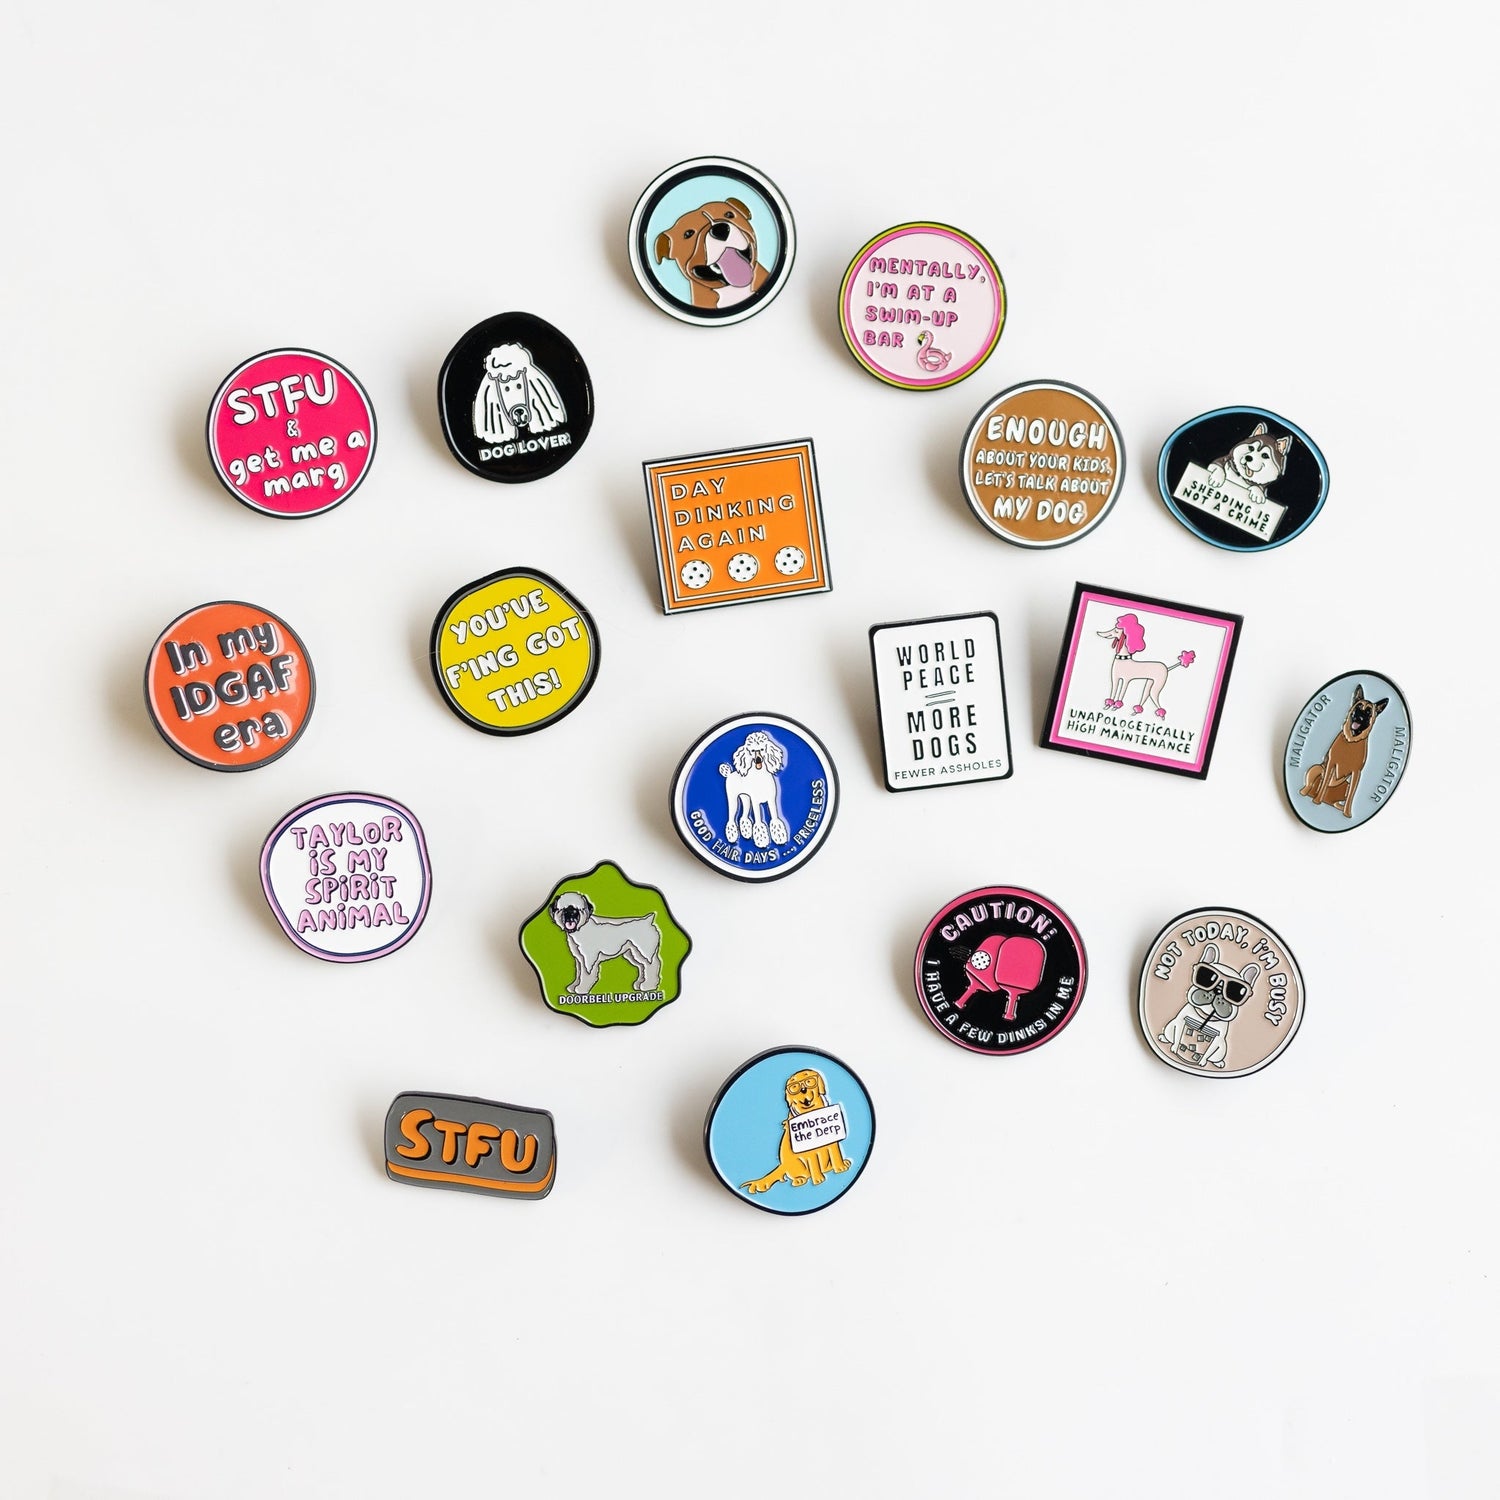 Image showing a variety of funny, cute, colorful, unique animal pins and keychains from The Verve Bar collection.